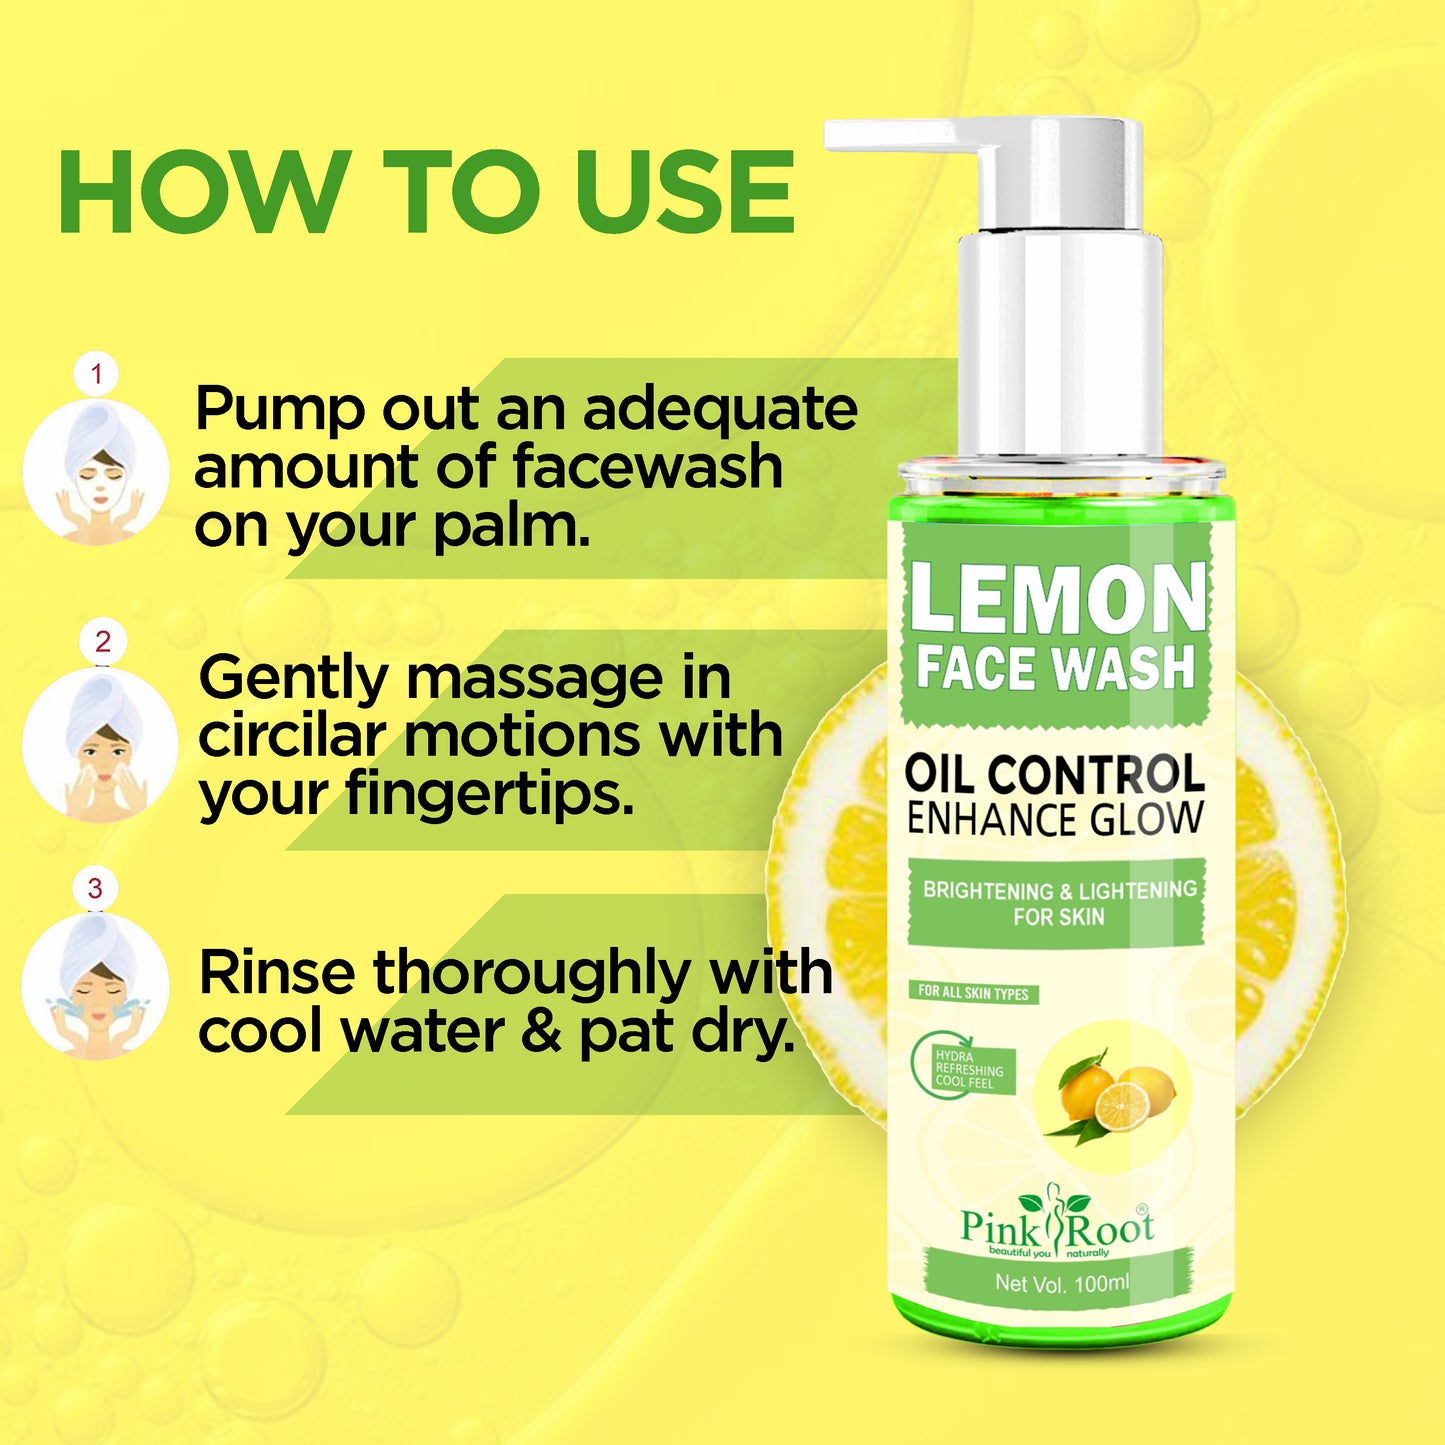 Pink Root Lemon Face Wash (100ml) - Refreshing Lemon Face Wash cleanses deeply, removing impurities and excess oil while revitalizing your skin with the energizing scent of fresh lemons